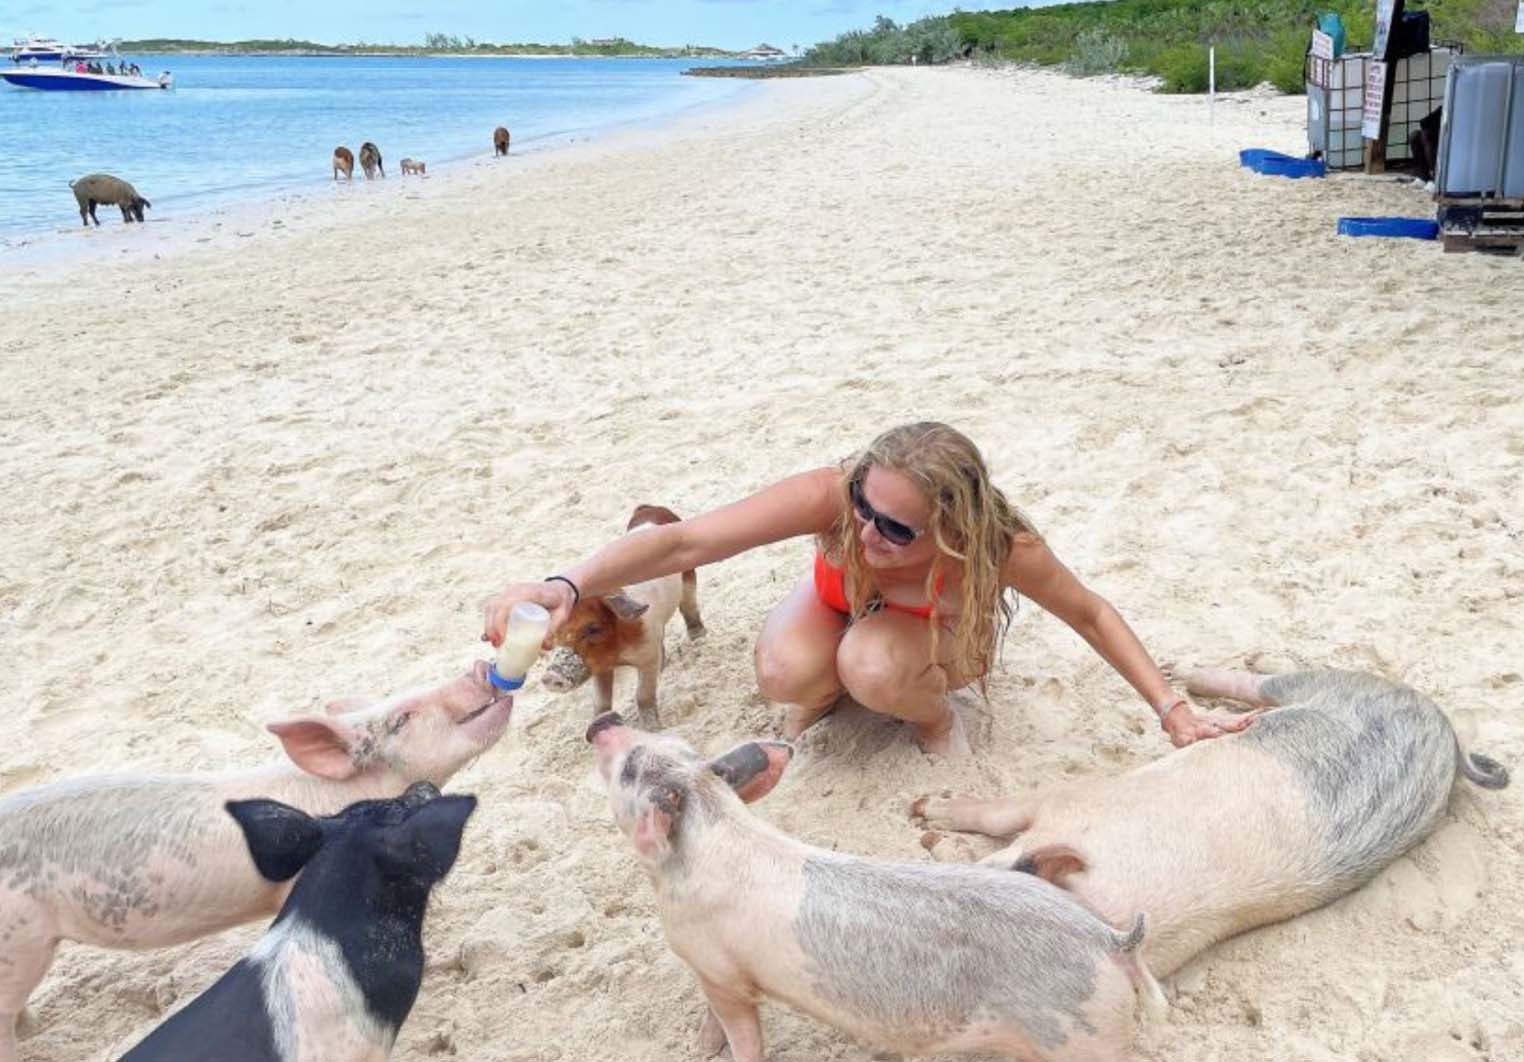 All the information you need to know before visiting Pig Beach in the Bahamas.